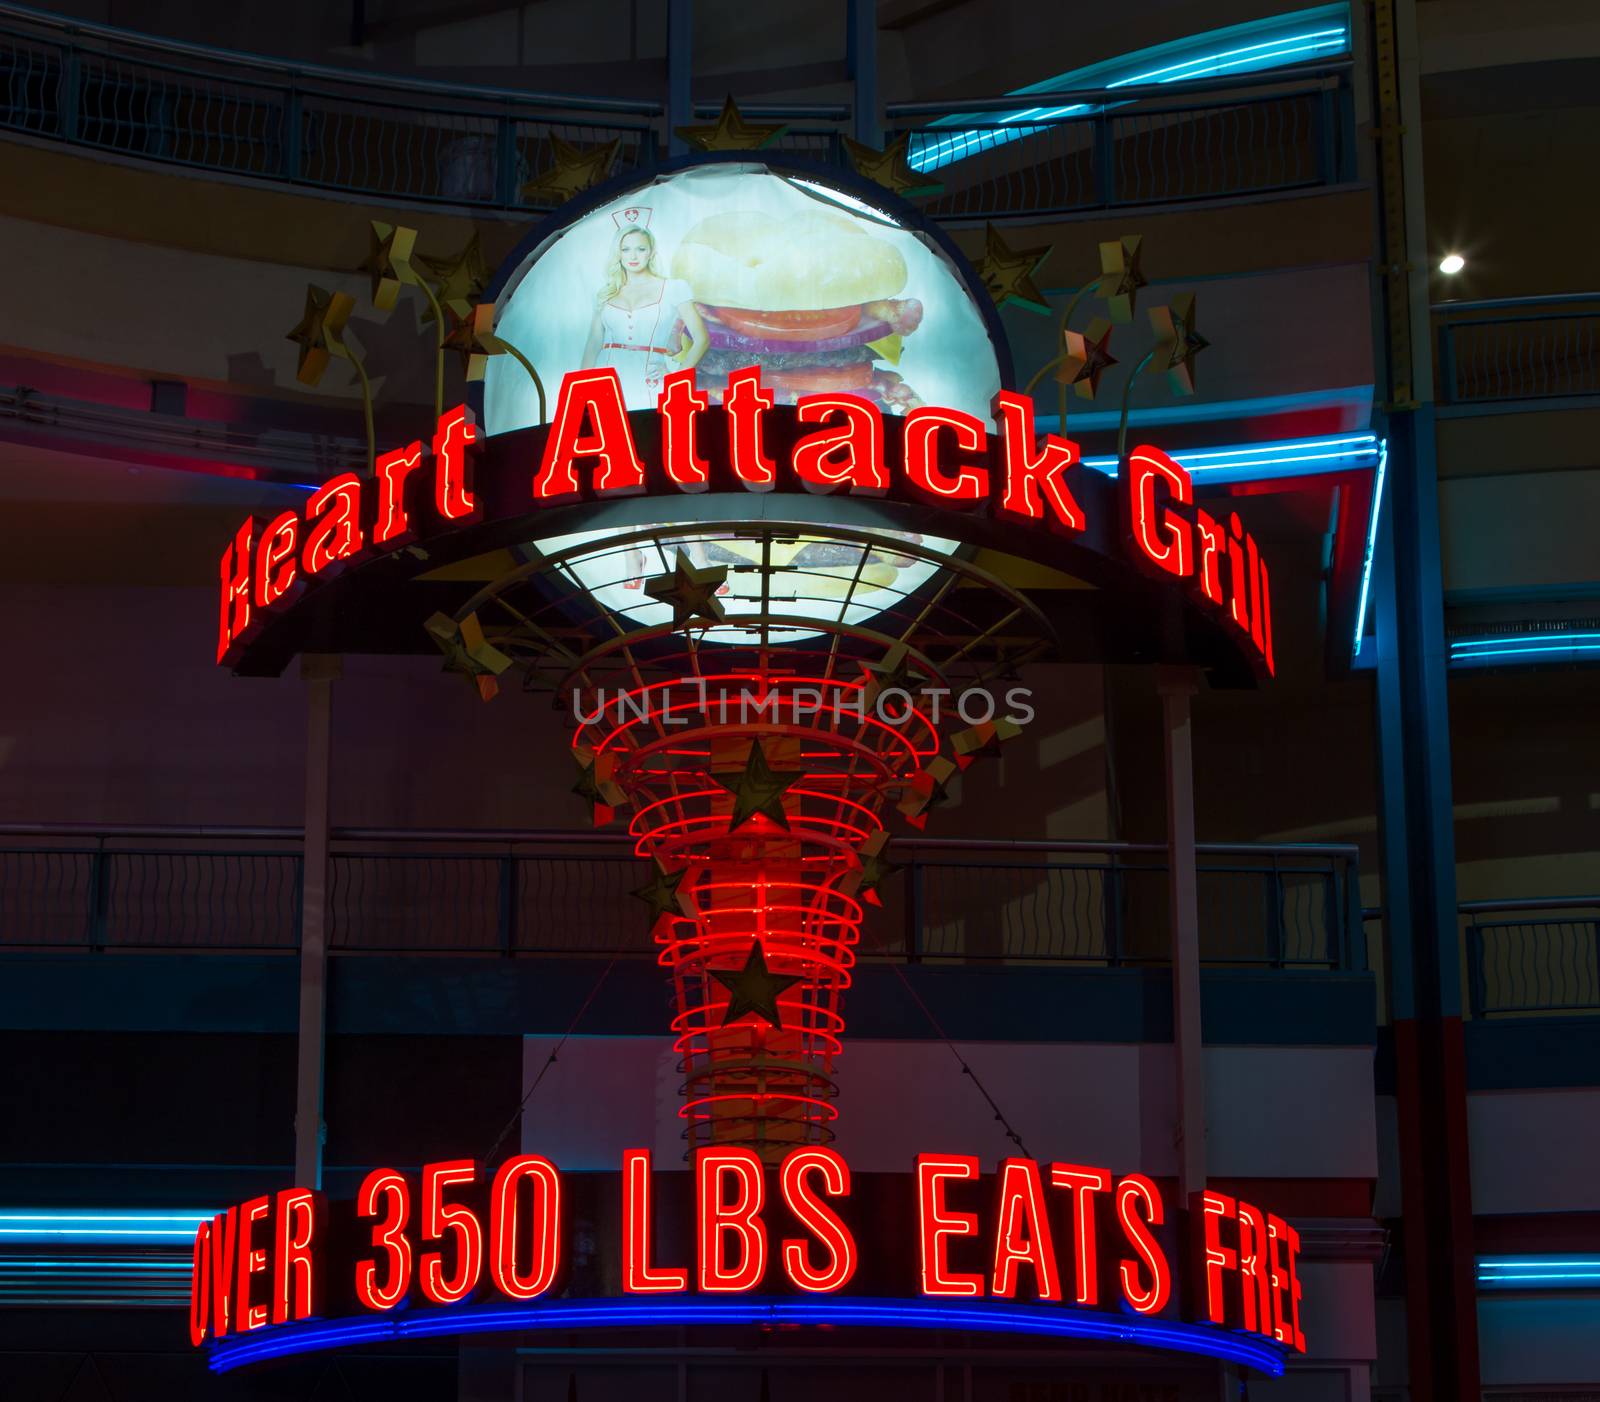 LAS VEGAS, NV/USA - FEBRUARY 14, 2016: Heart Attack Grill exterior sign and logo.The Heart Attack Grill is an American hamburger restaurant in Las Vegas, Nevada.